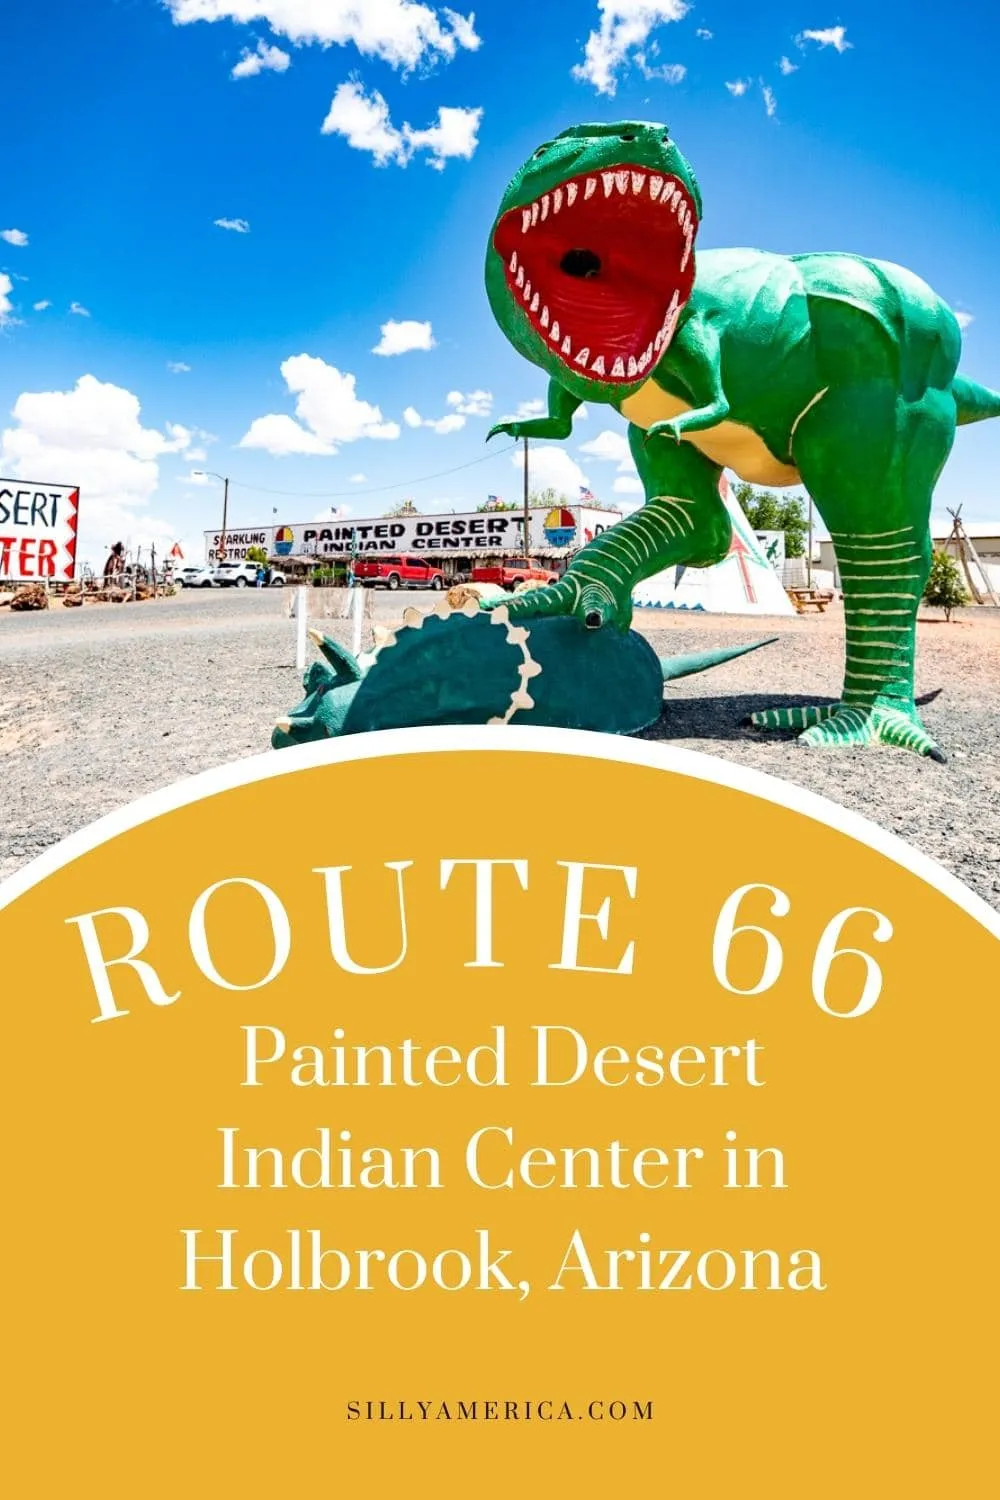 Painted Desert Indian Center in Holbrook, Arizona has been serving customers since 1979. Pull off the road for the Jurassic photo ops, stay for the unique selection of Arizona souvenirs. Find a menagerie of roadside attractions meant to catch your eye from the highway, like a slew of large cartoonish dinosaurs attacking other dinosaurs. Visit this Arizona Route 66 roadside attraction and souvenir store on your Route 66 road trip. Add it to your travel itinerary! #Route66 #Route66RoadTrip